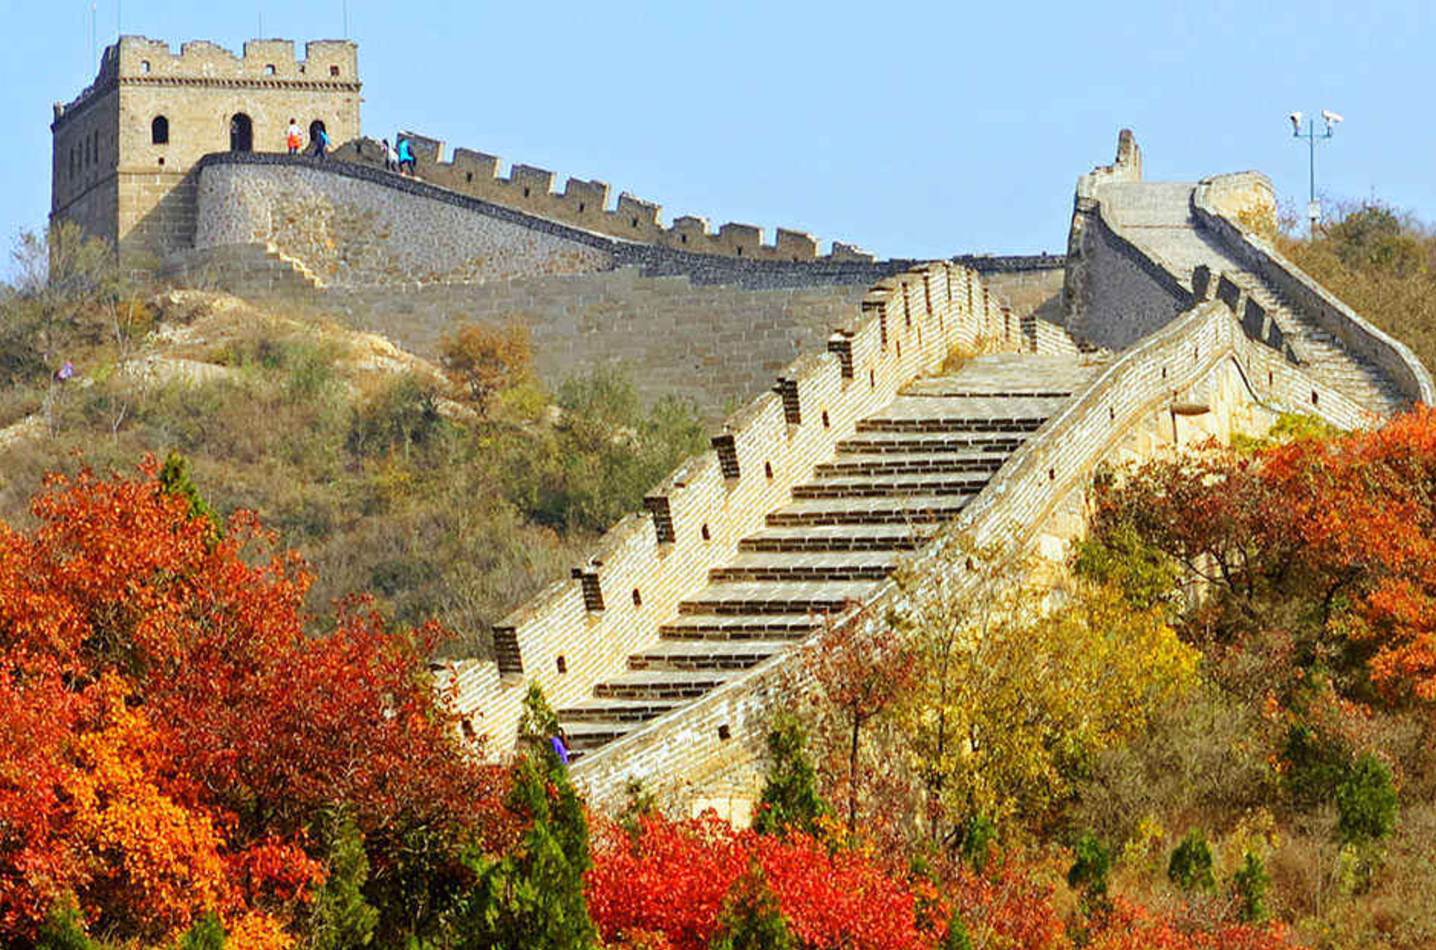 "8 Scenic Spots for Leaf Peeping in China," Fodors, Sept. 2017